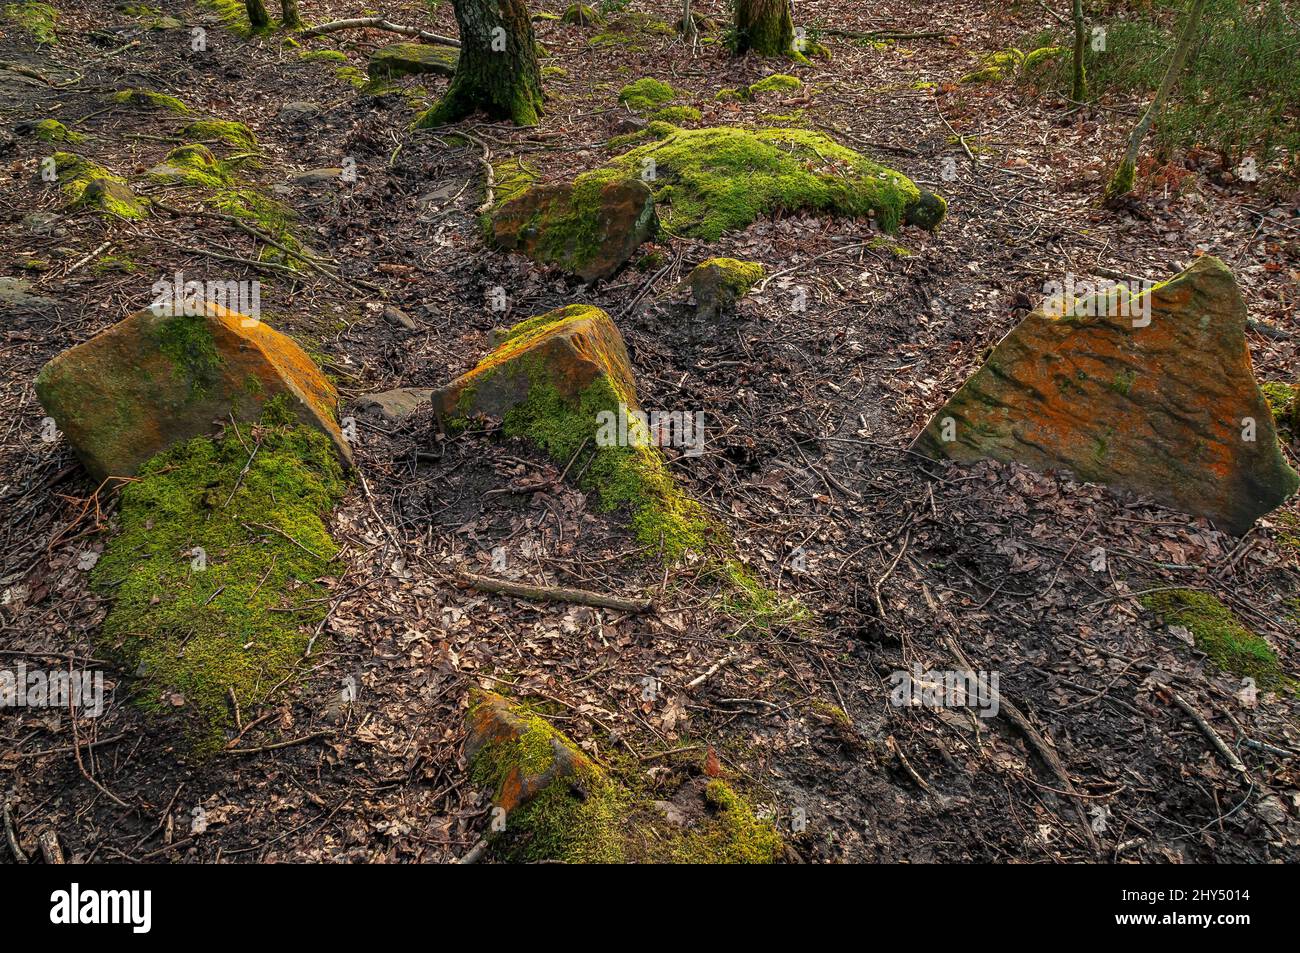 Gritstone boulders showing fluvial deposition ripple-marks, and bright orange lichen and bright green moss growing all over them. Stock Photo